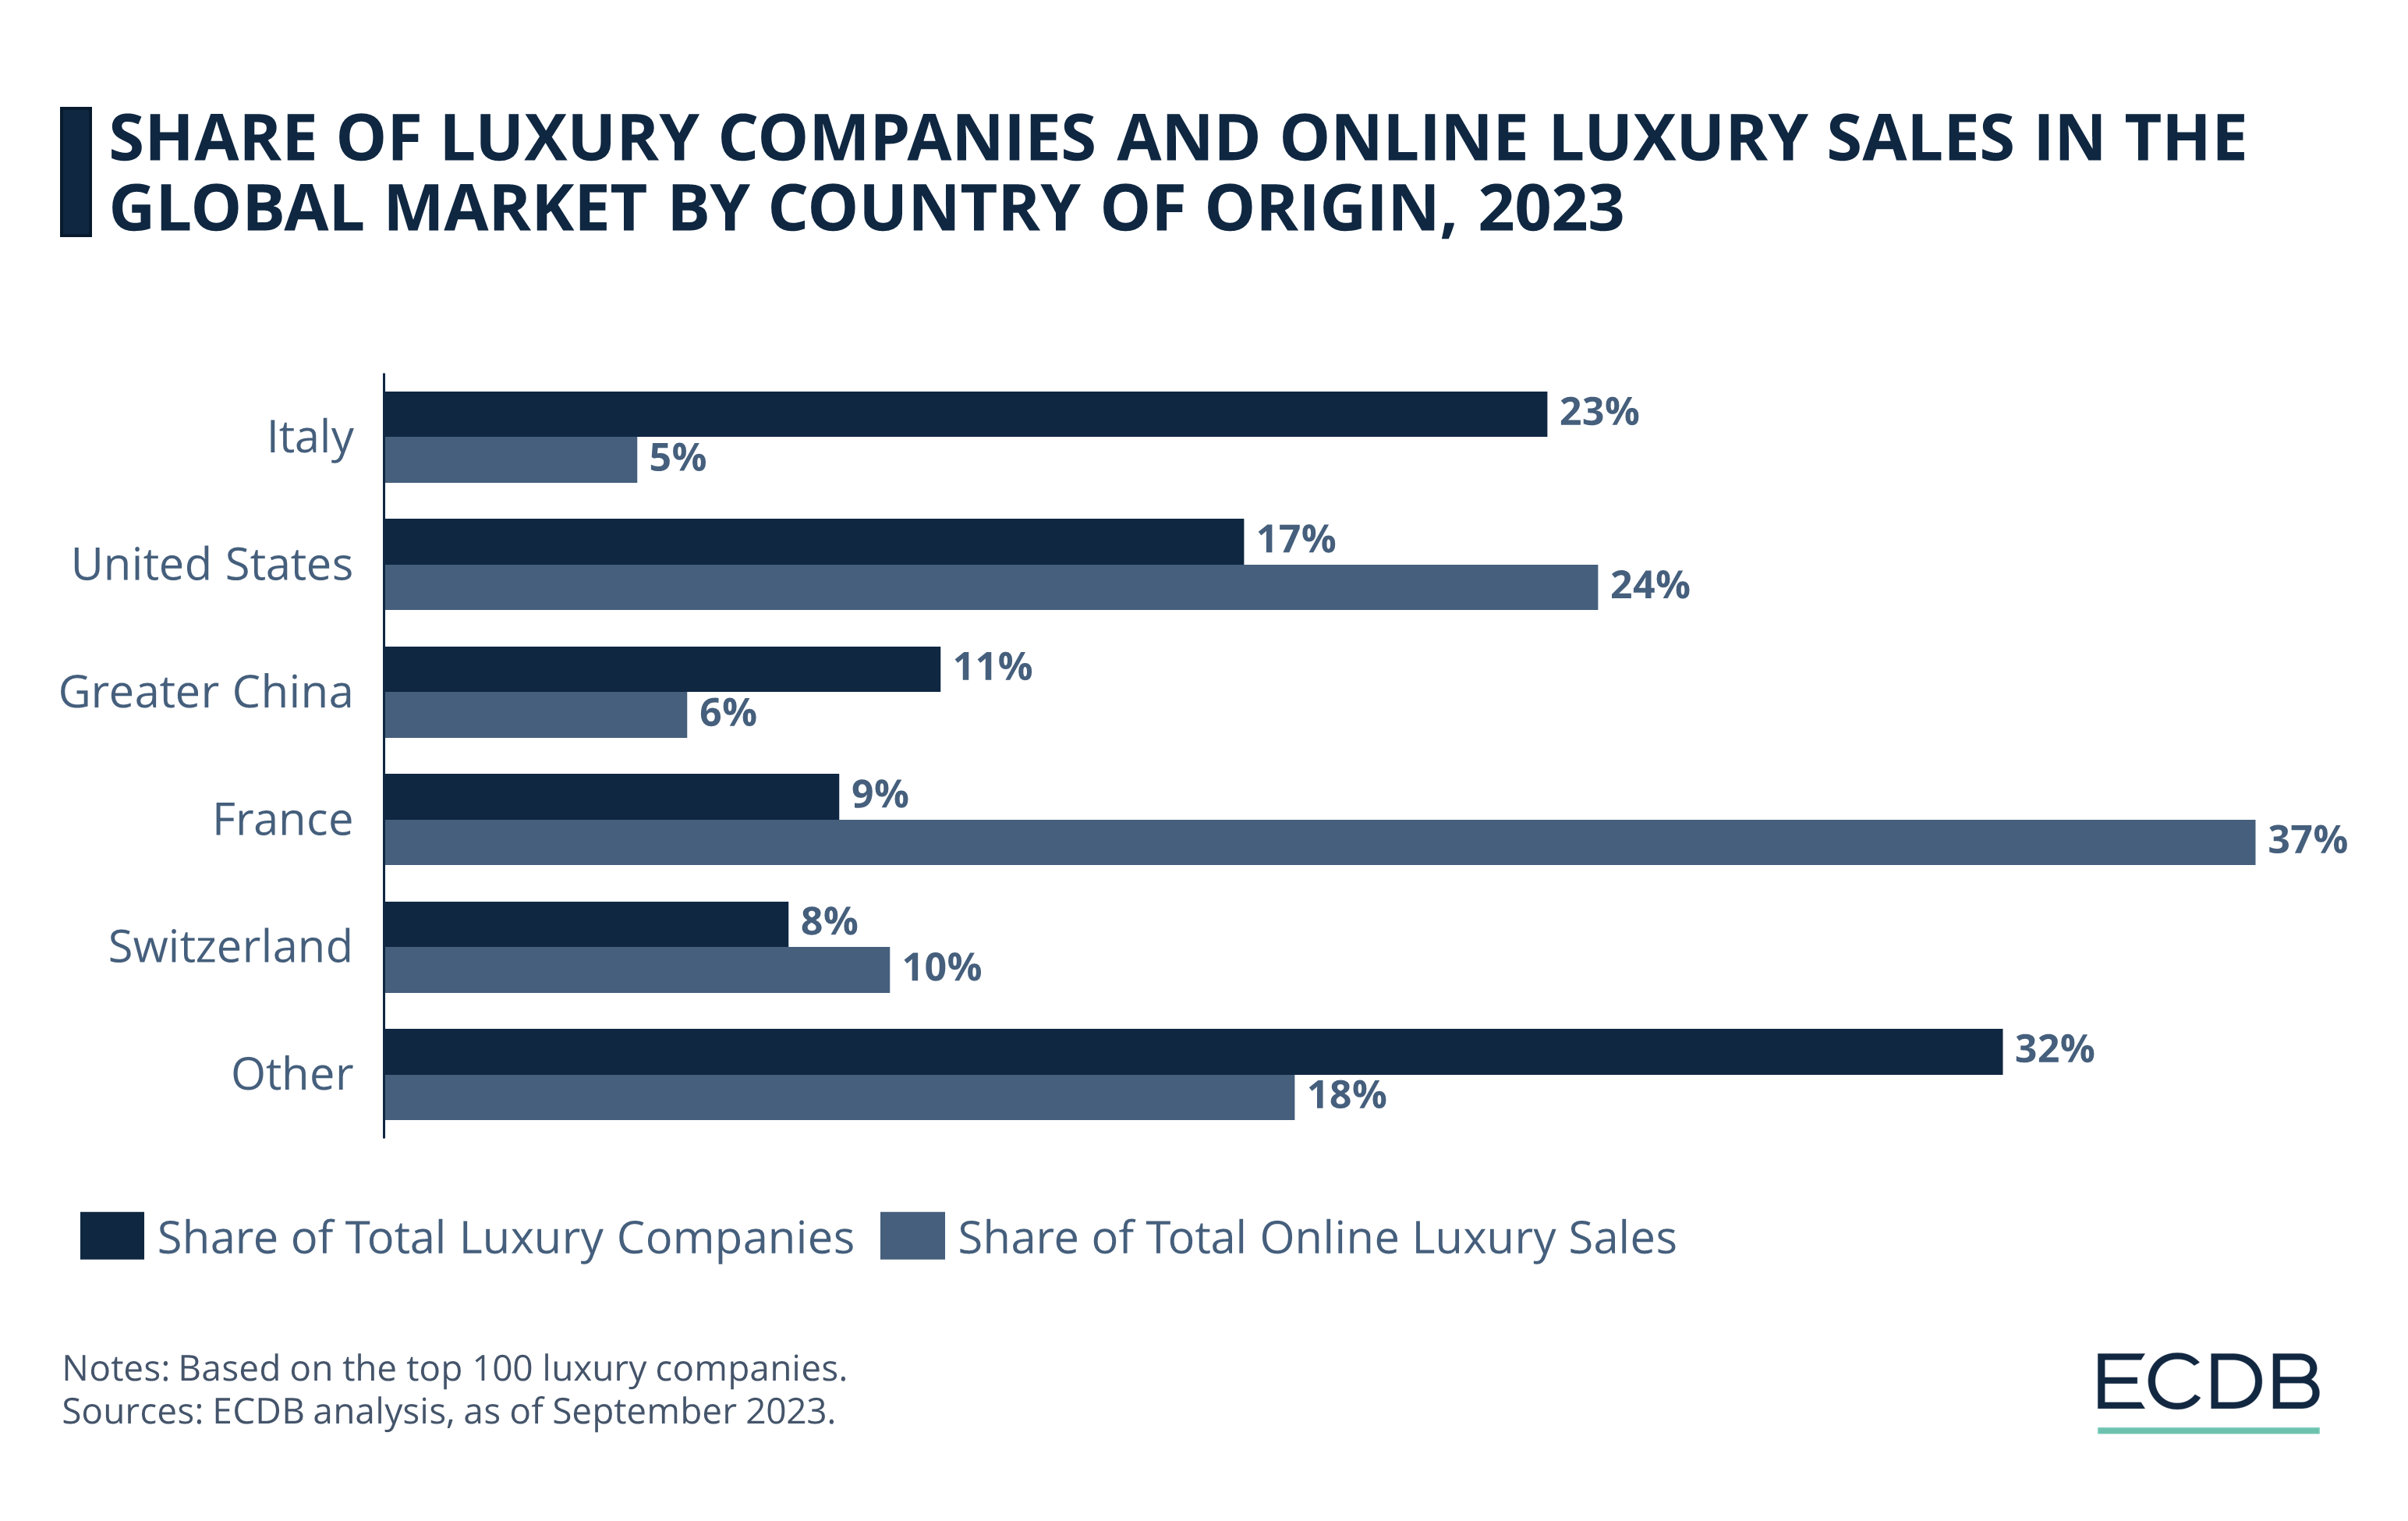 Share of Luxury Companies and Online Luxury Sales in the Global Market by Country of Origin, 2023